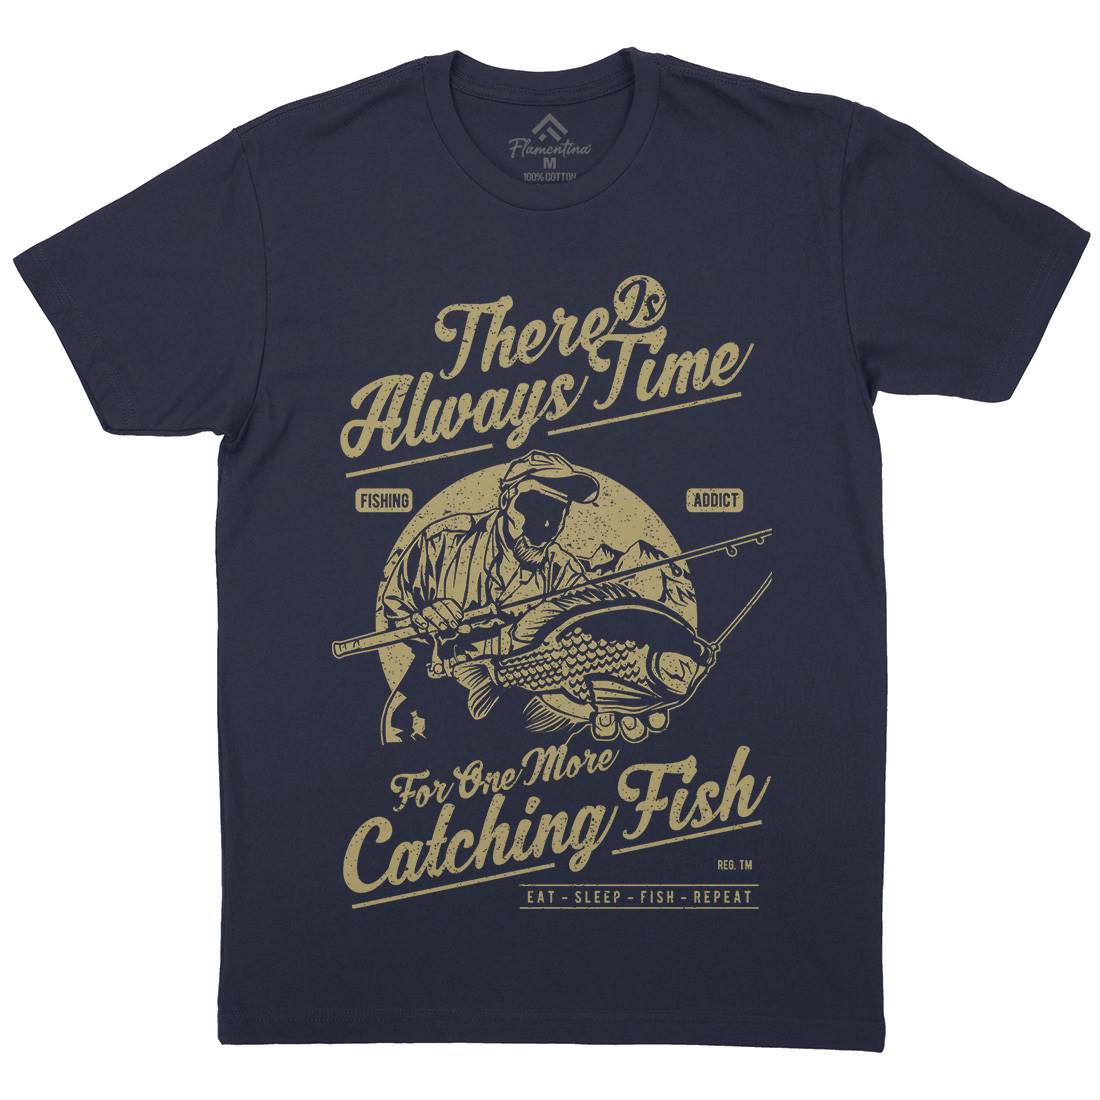 One More Catching Mens Crew Neck T-Shirt Fishing A731